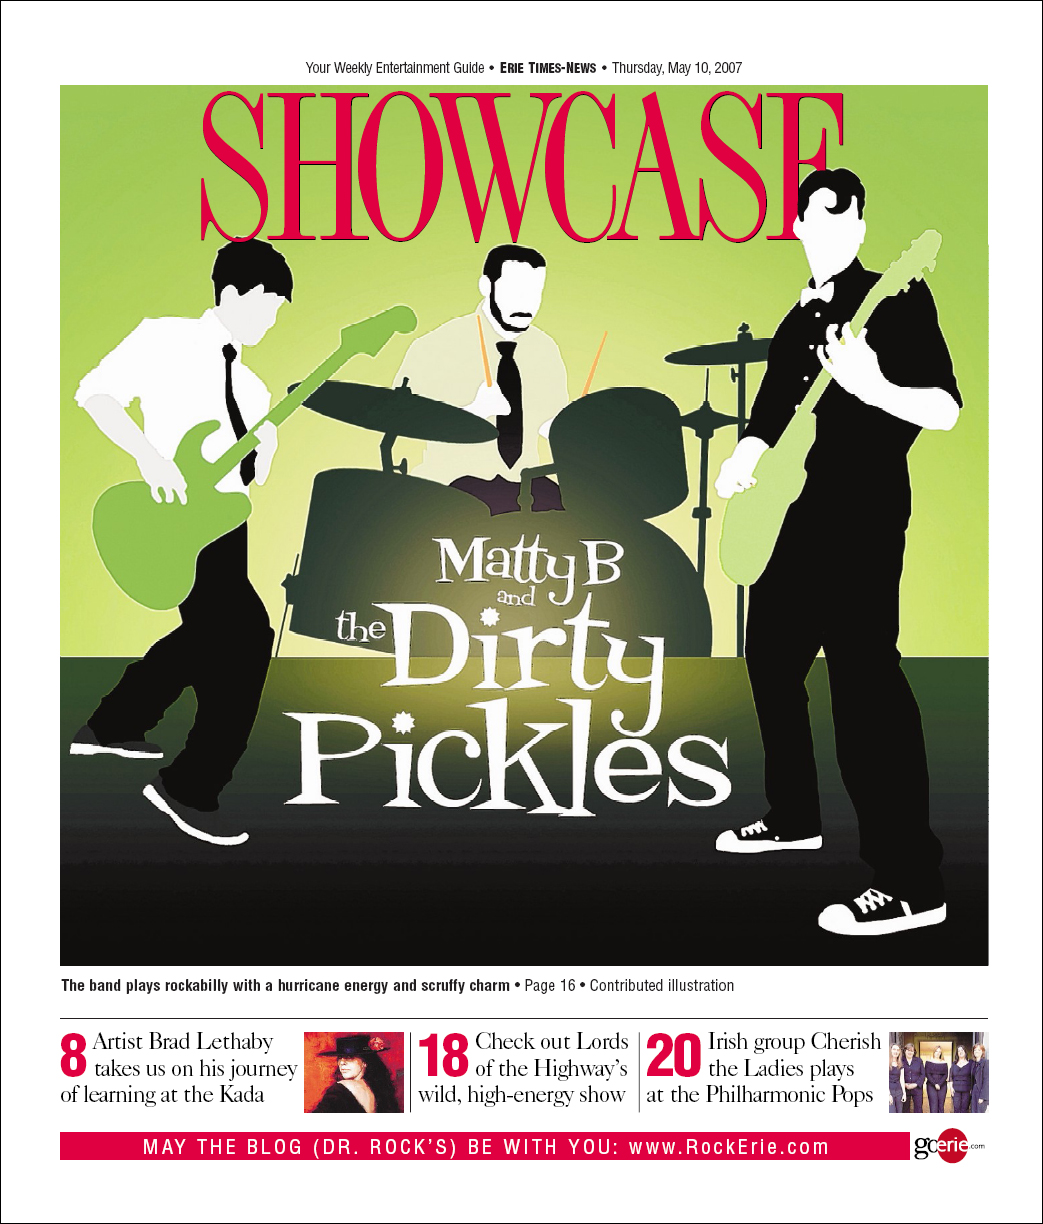 Erie Times-News Showcase: Get Pickled